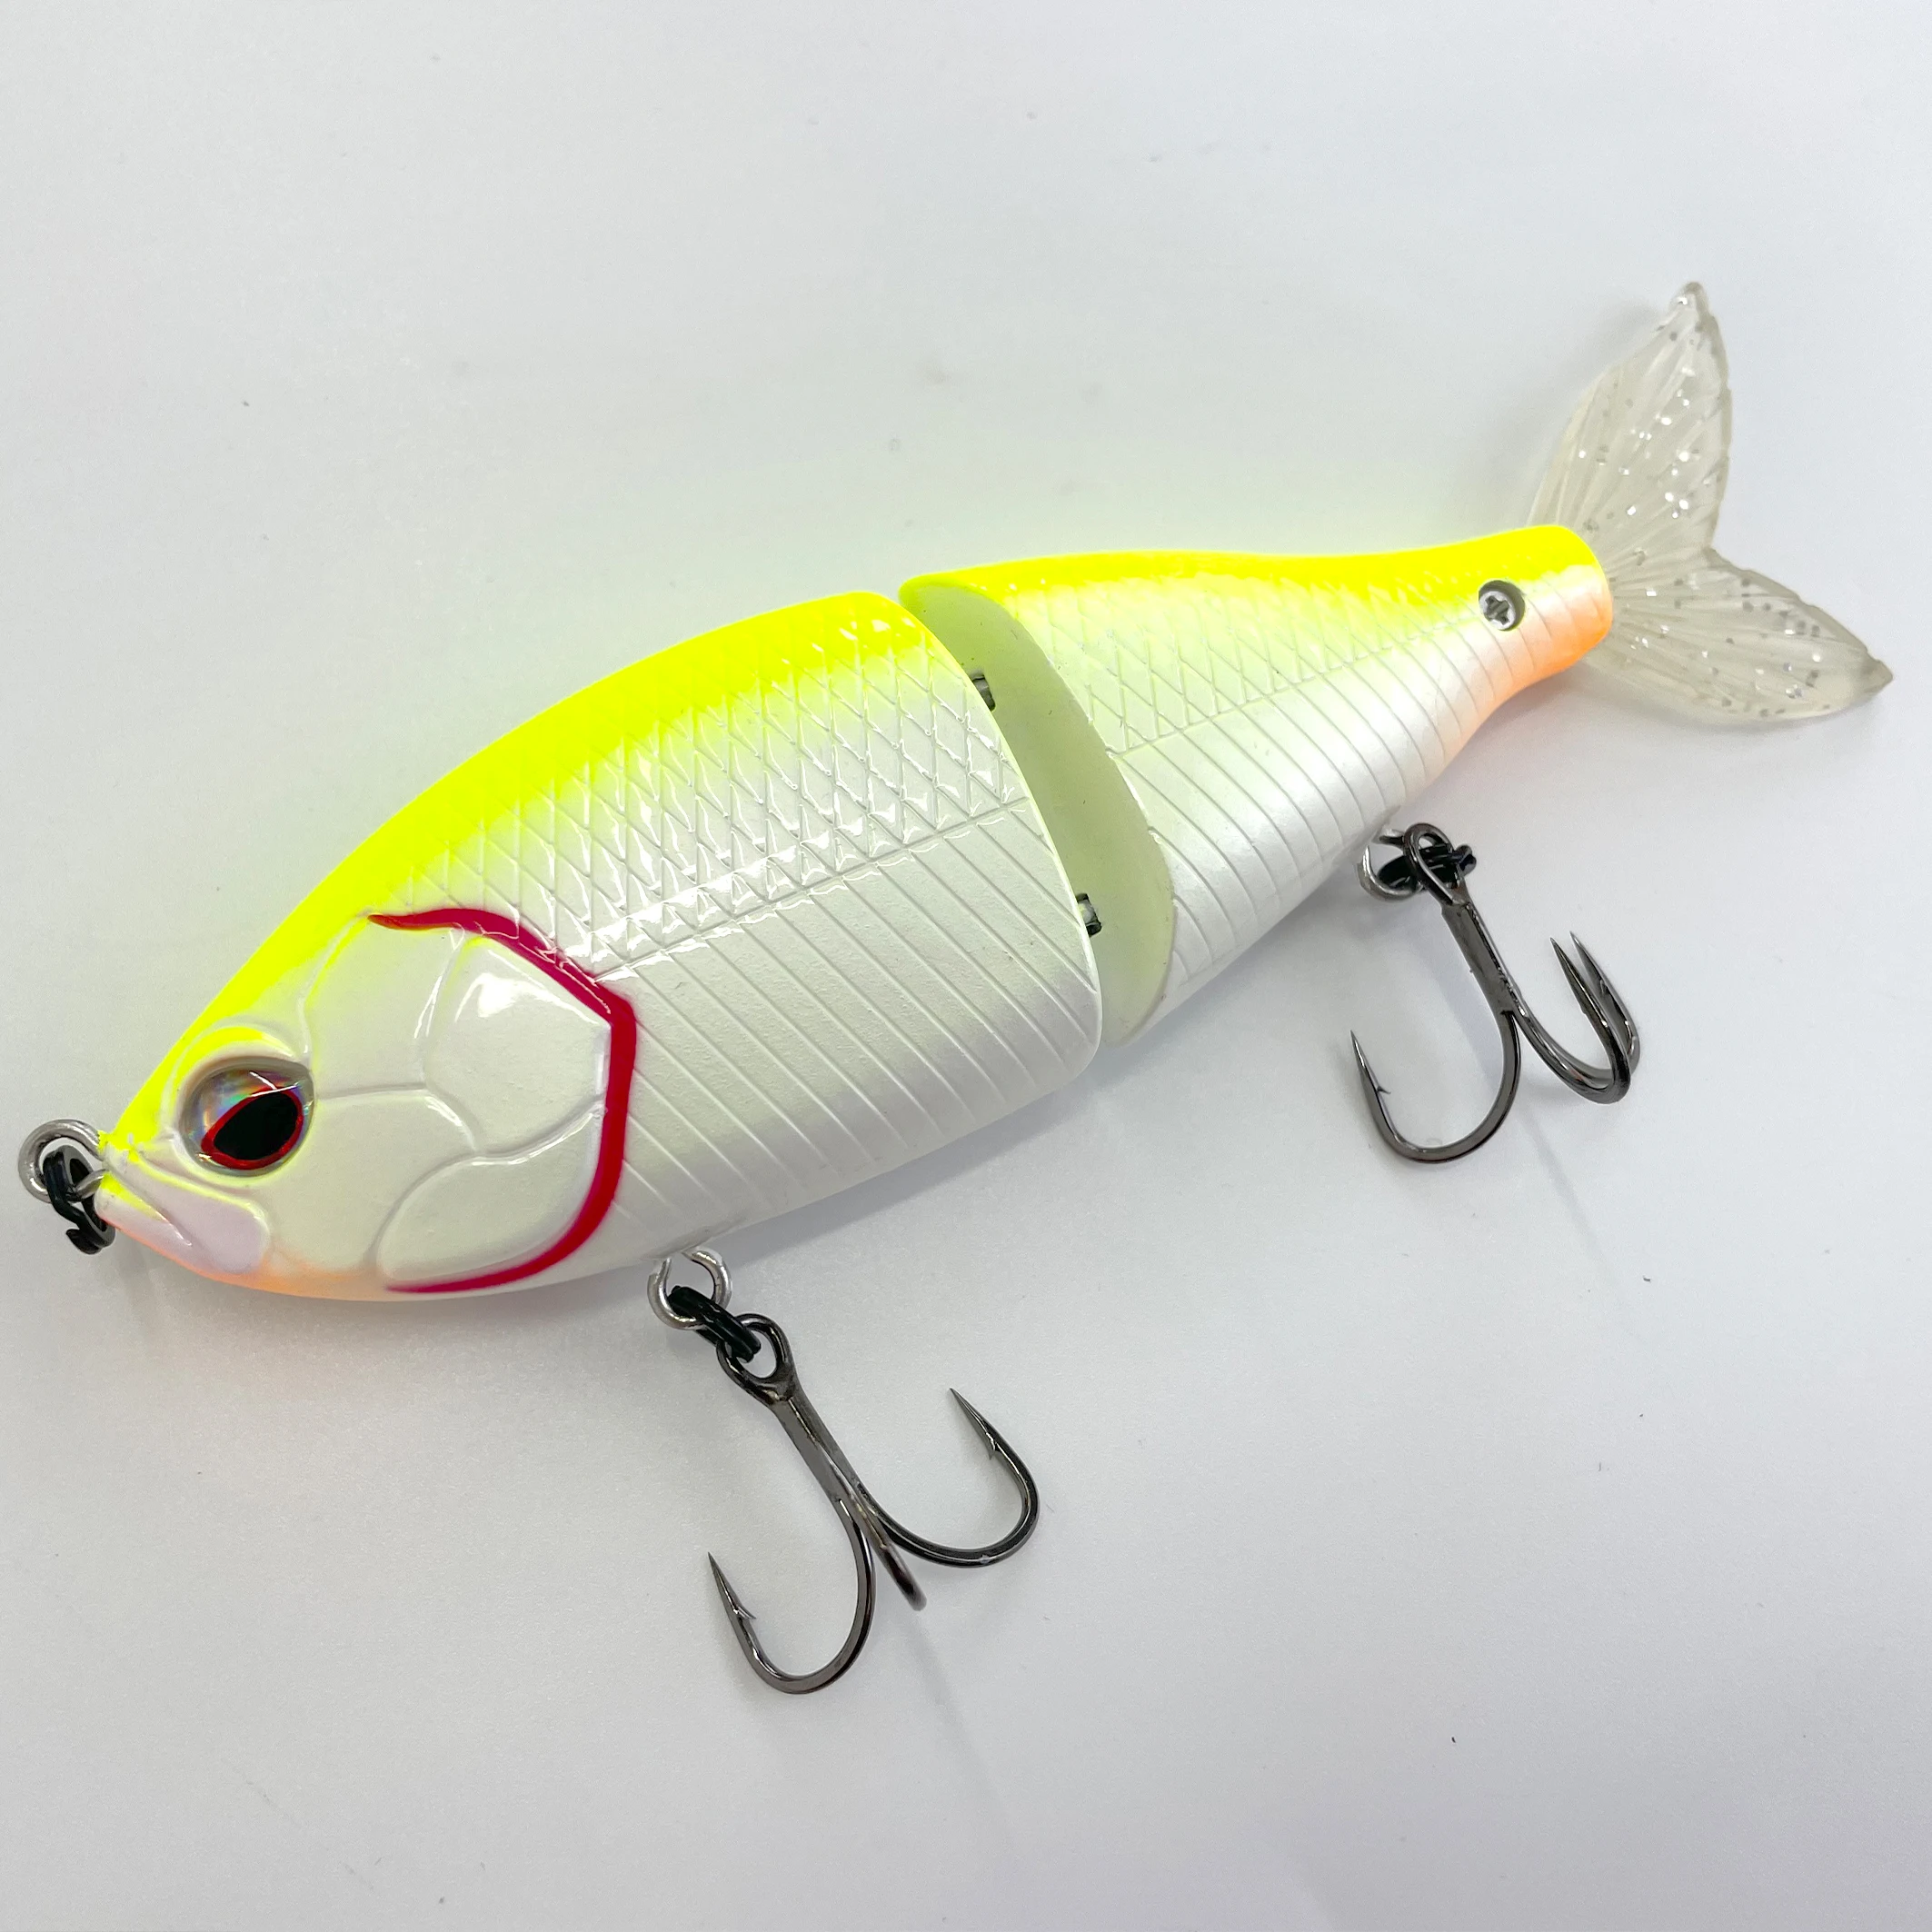 

Selco 115mm 60g Slide Shad Bait Sinking Wobbler Jerk Lure with Hard Plastic Body and Brush Tail Pike Lures for Lake Fishing